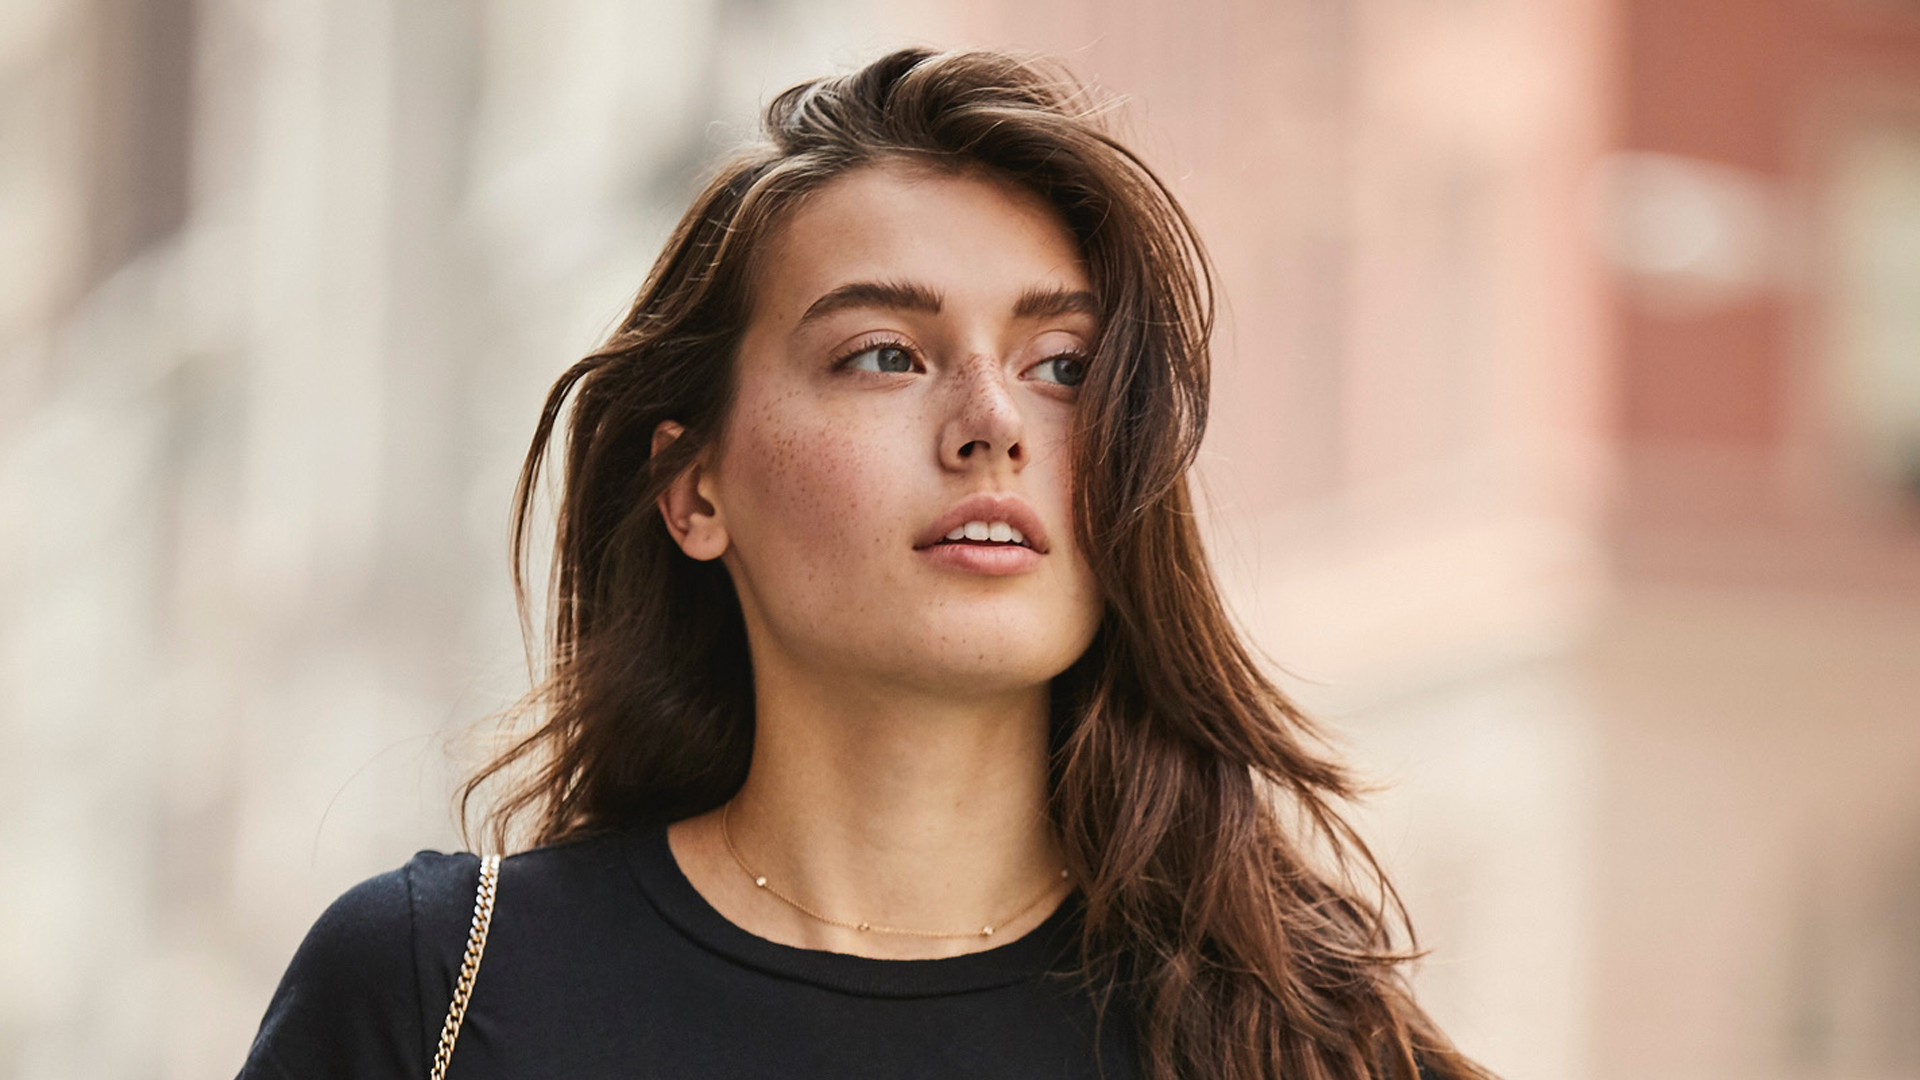 People 1920x1080 women model brunette long hair Jessica Clements freckles face looking away